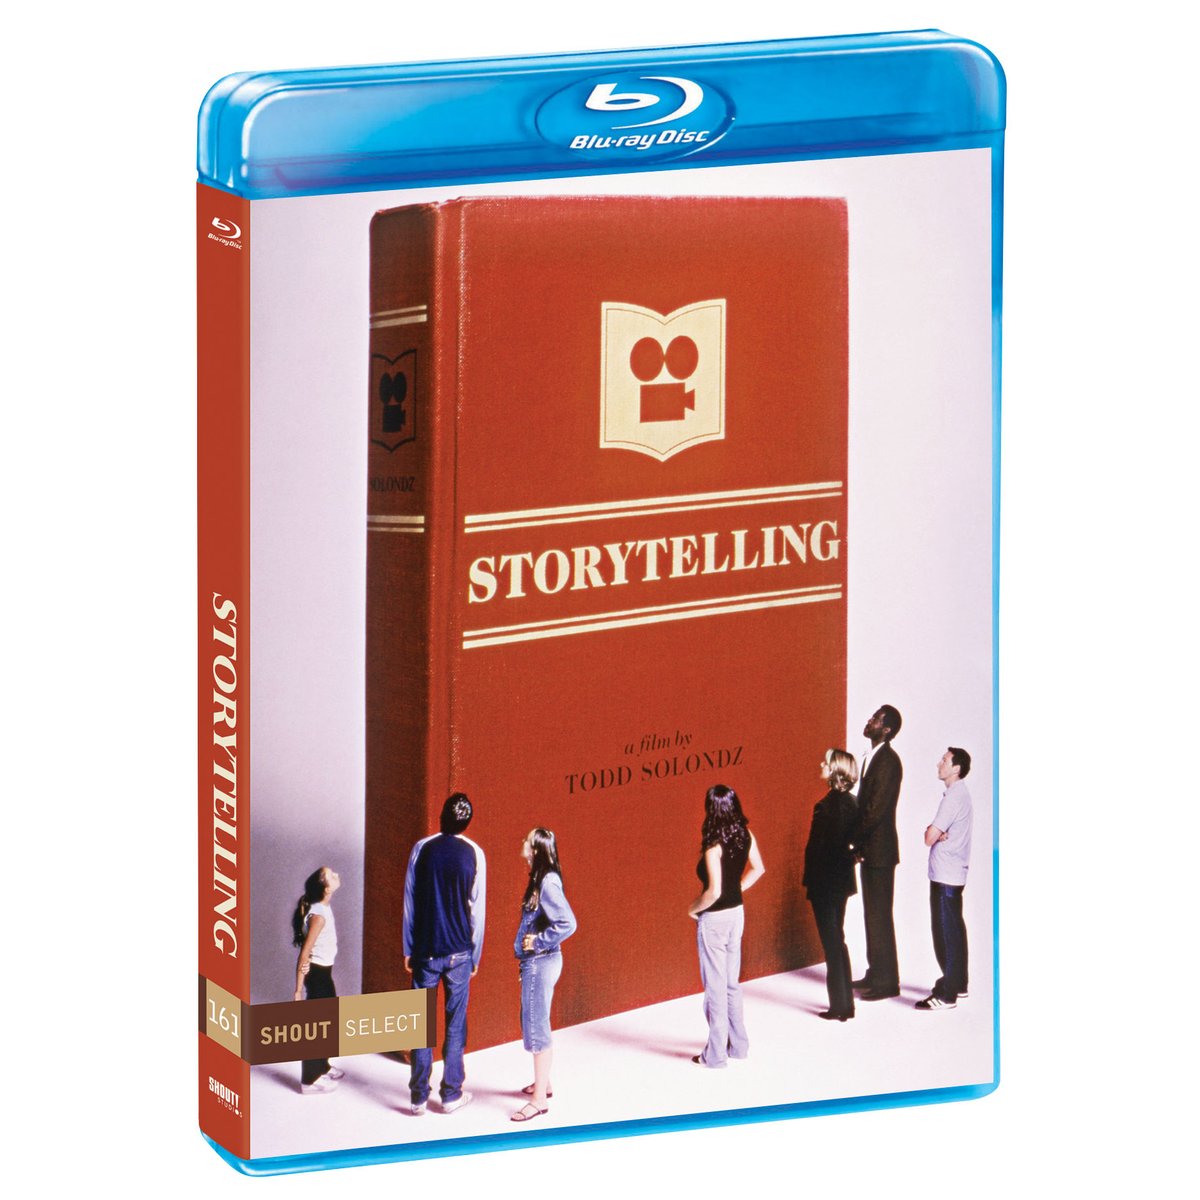 STORYTELLING from acclaimed writer-director Todd Solondz (Welcome To The Dollhouse, Happiness) is coming to Blu-ray on July 9. Solondz uses his ever-present razor-sharp wit and observant eye to cut open his characters and skewer the American dream. shoutfactory.com/products/story…